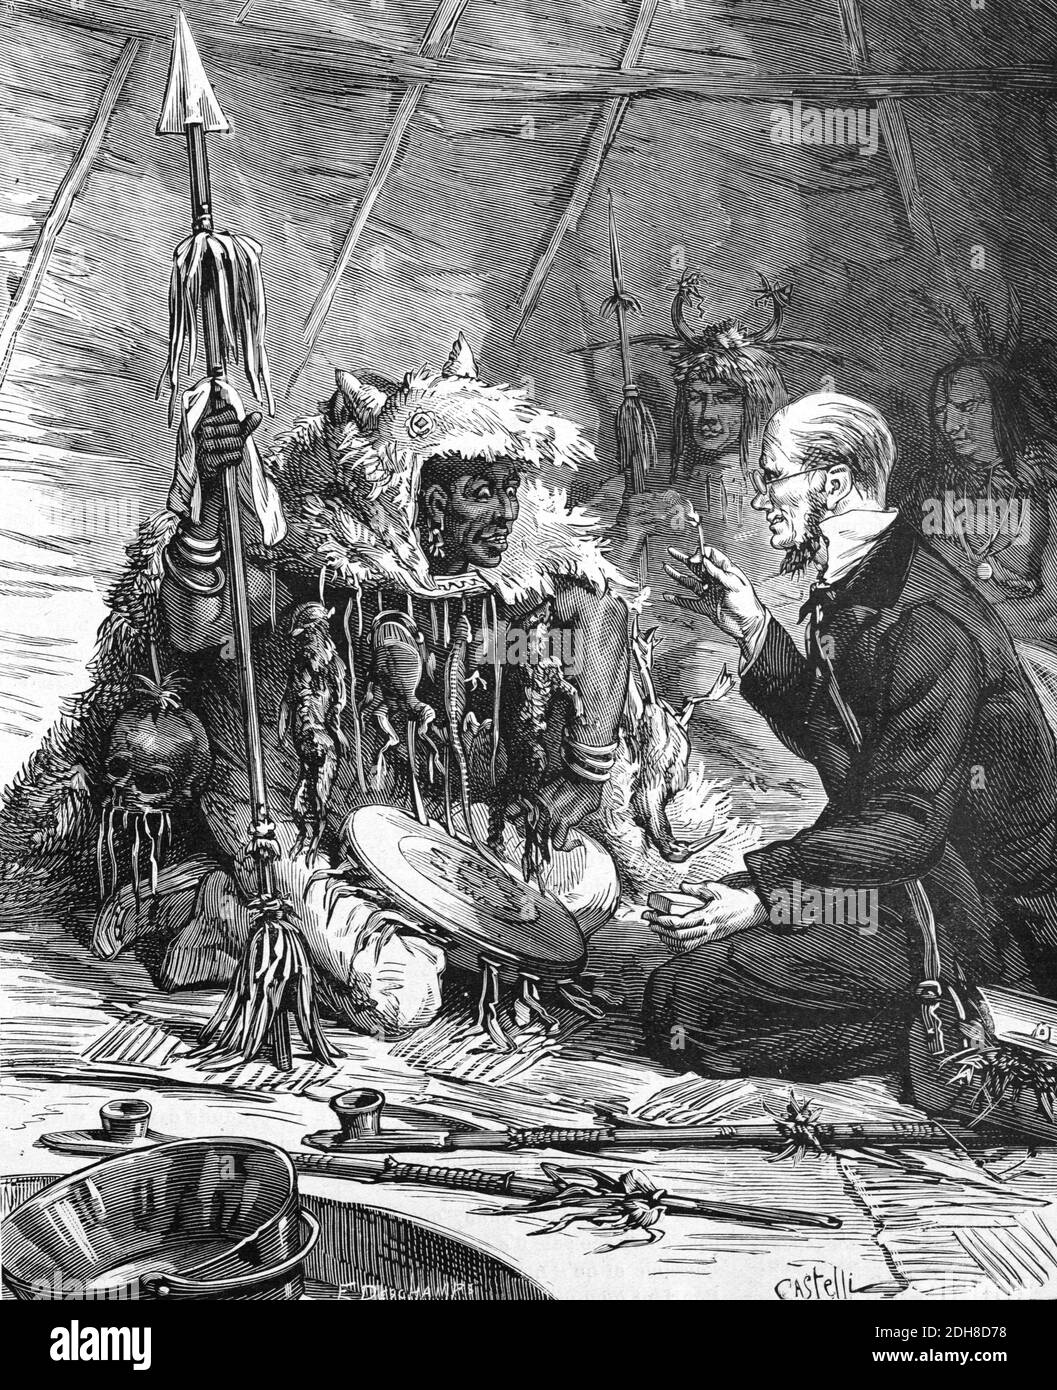 European Settler Demonstrating Matches to Native Americans, First Nation People or American Indians inside Tipi, Tepee or Teepee in US, United States or United States of America (Engr 1880 Castelli) Vintage Illustration or Engraving Stock Photo